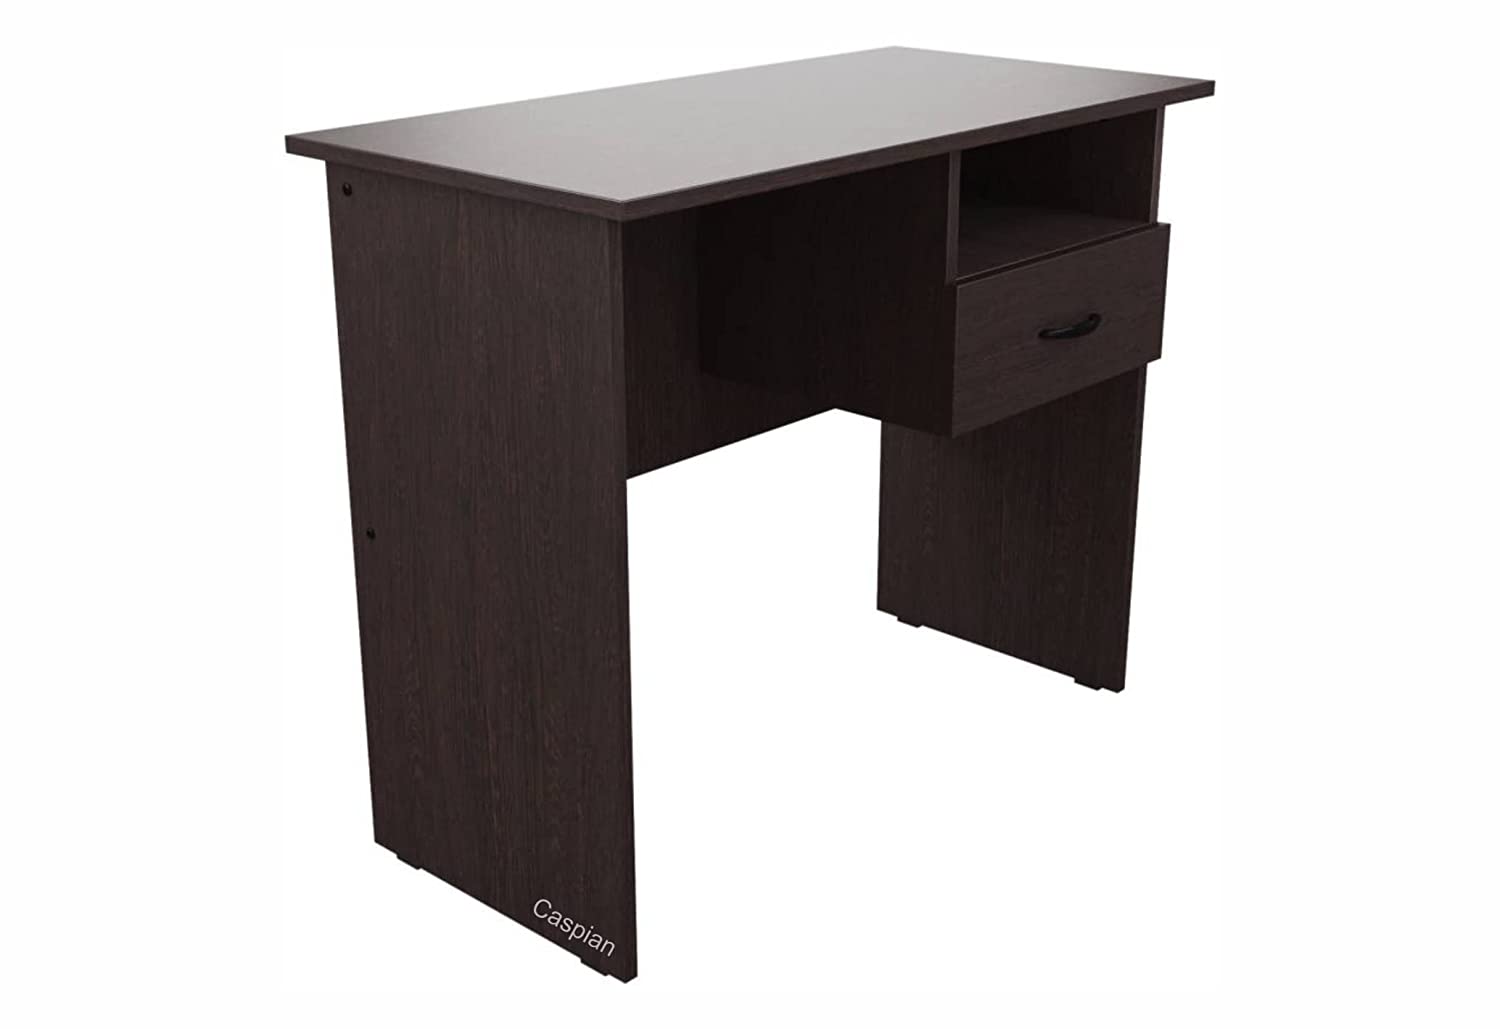 Engineered Wood Study Table in Coffee Brown with Drawer and Open Shelves | Work Table | Office Table | Small Table for Home